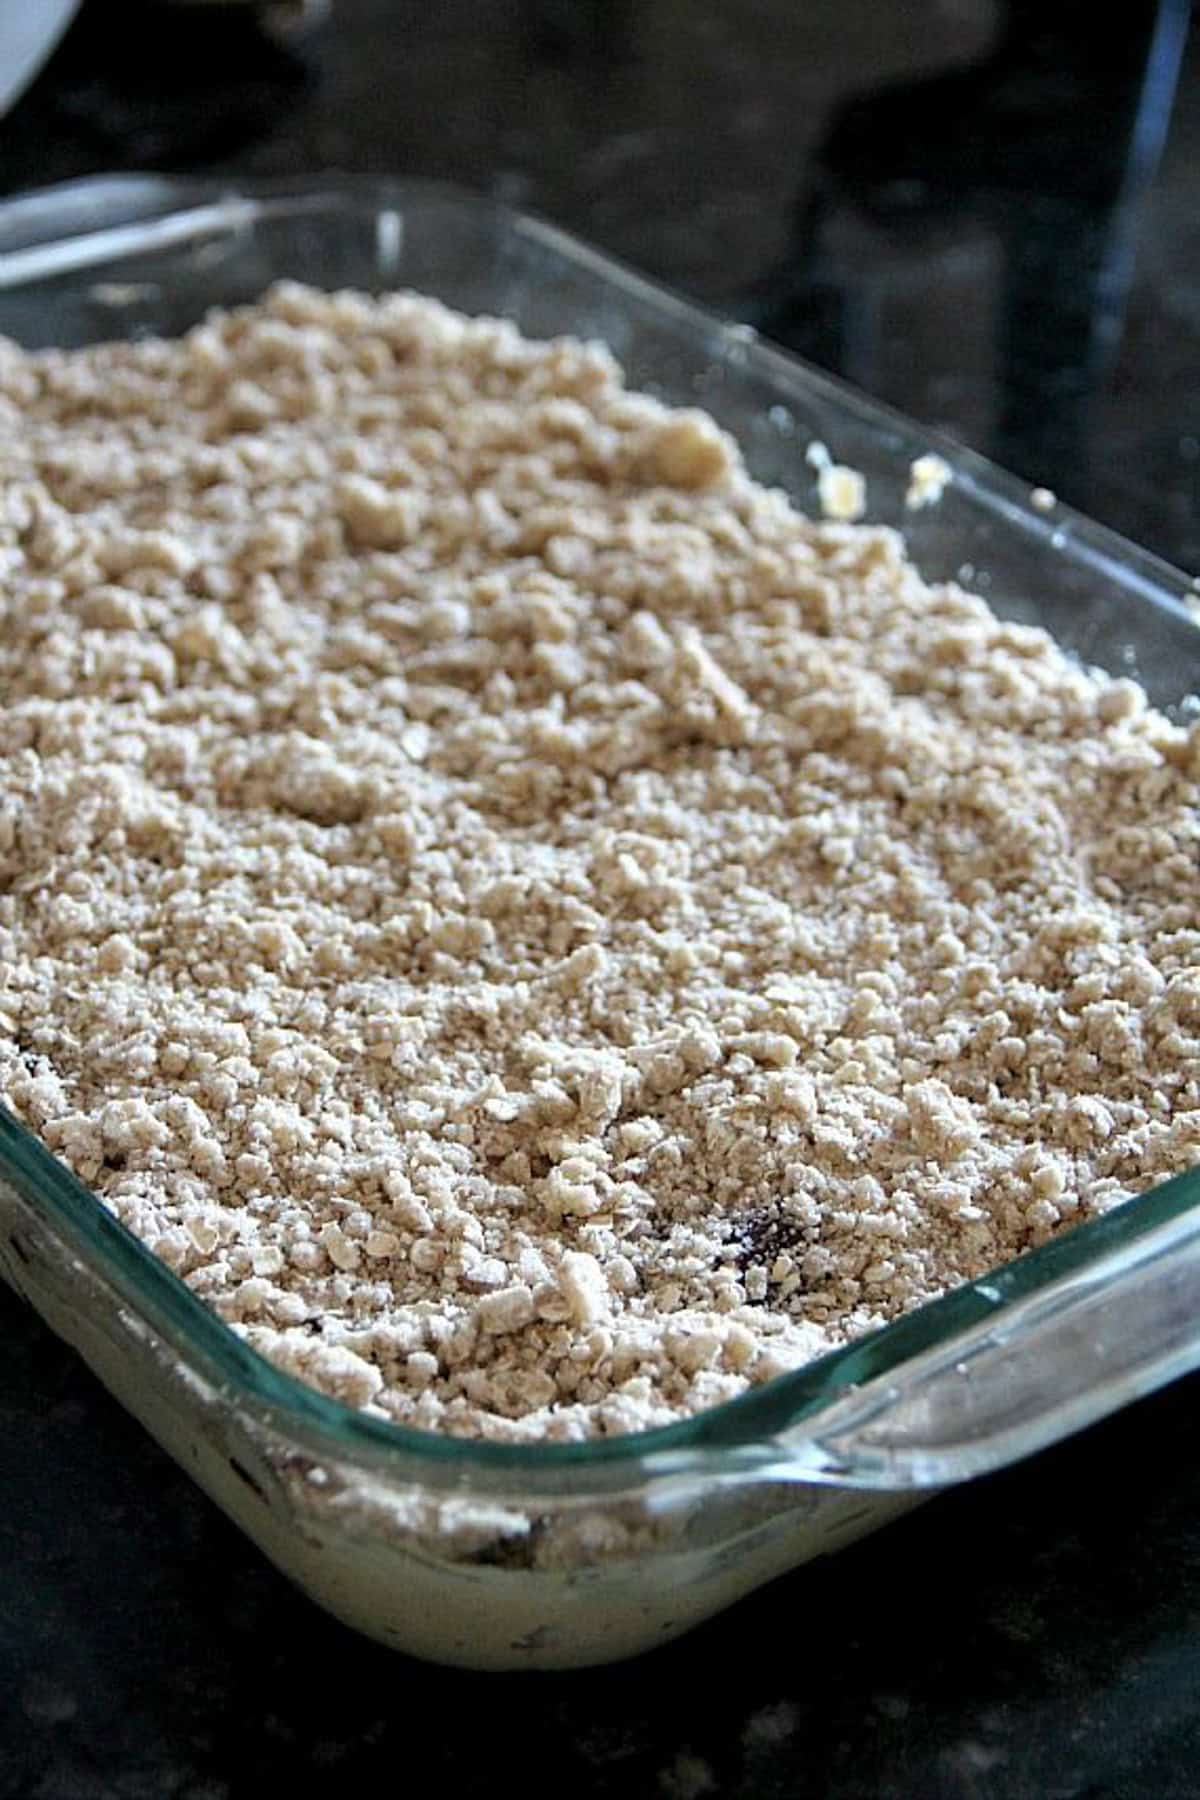 Unbaked peanut butter jelly bars topped with a crumble in a glass baking dish.